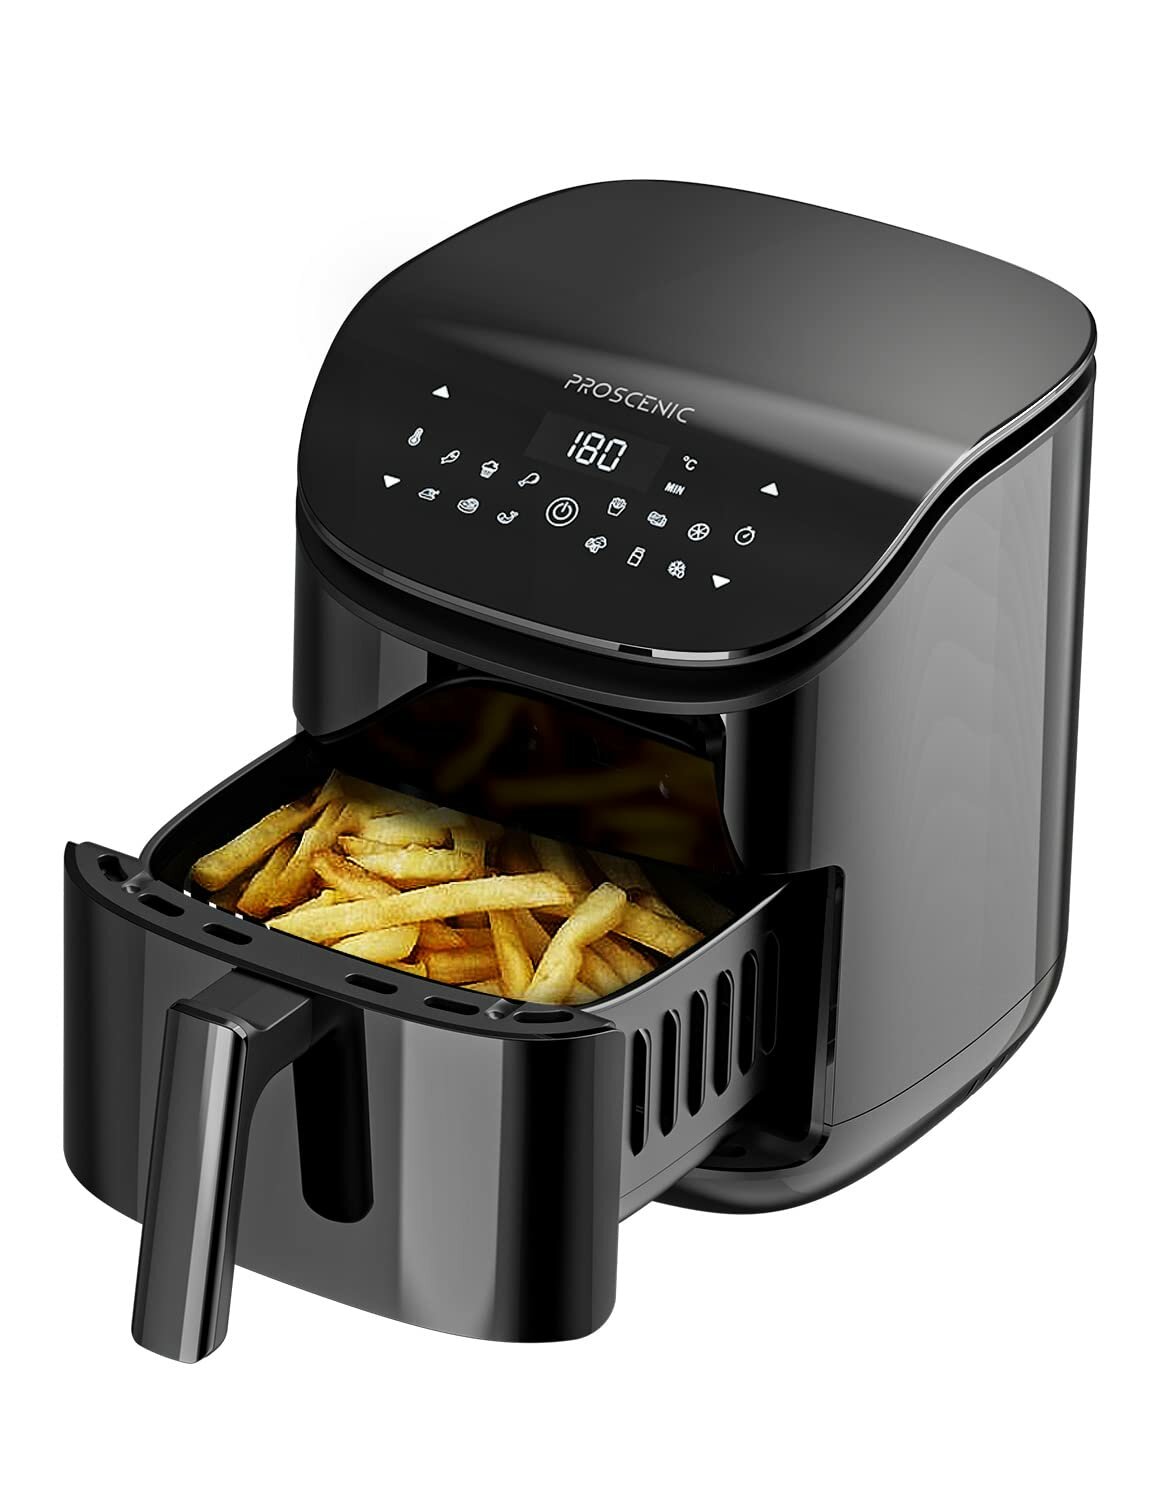 best price,proscenic,t20,1500w,air,fryer,eu,coupon,price,discount